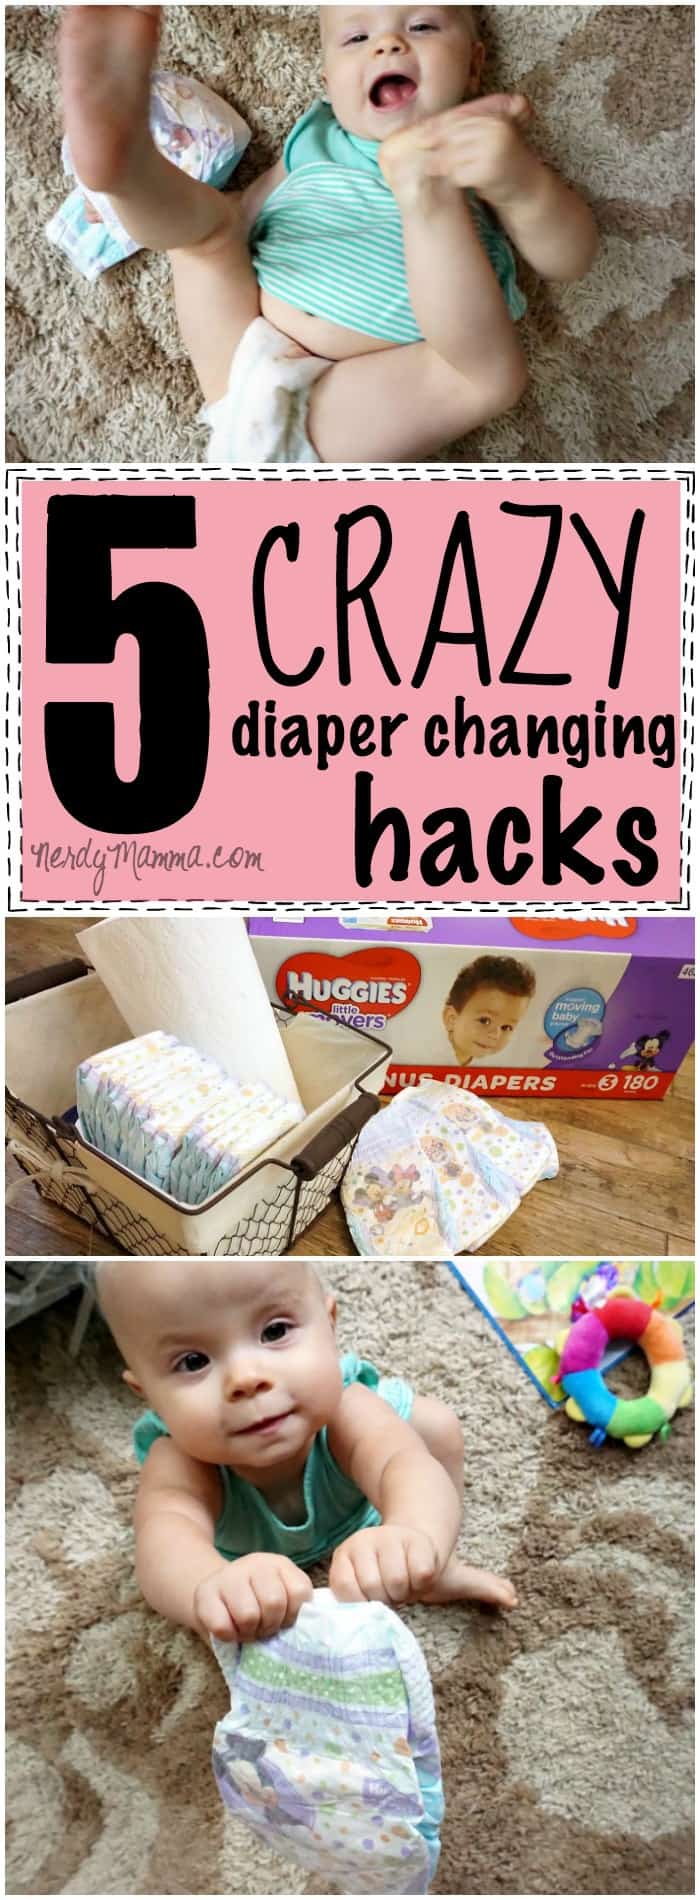 OMG! I love these 5 crazy diaper changing hacks! They're so easy--I can't believe I didn't think of them...and the trick with the pillow cover Genius.